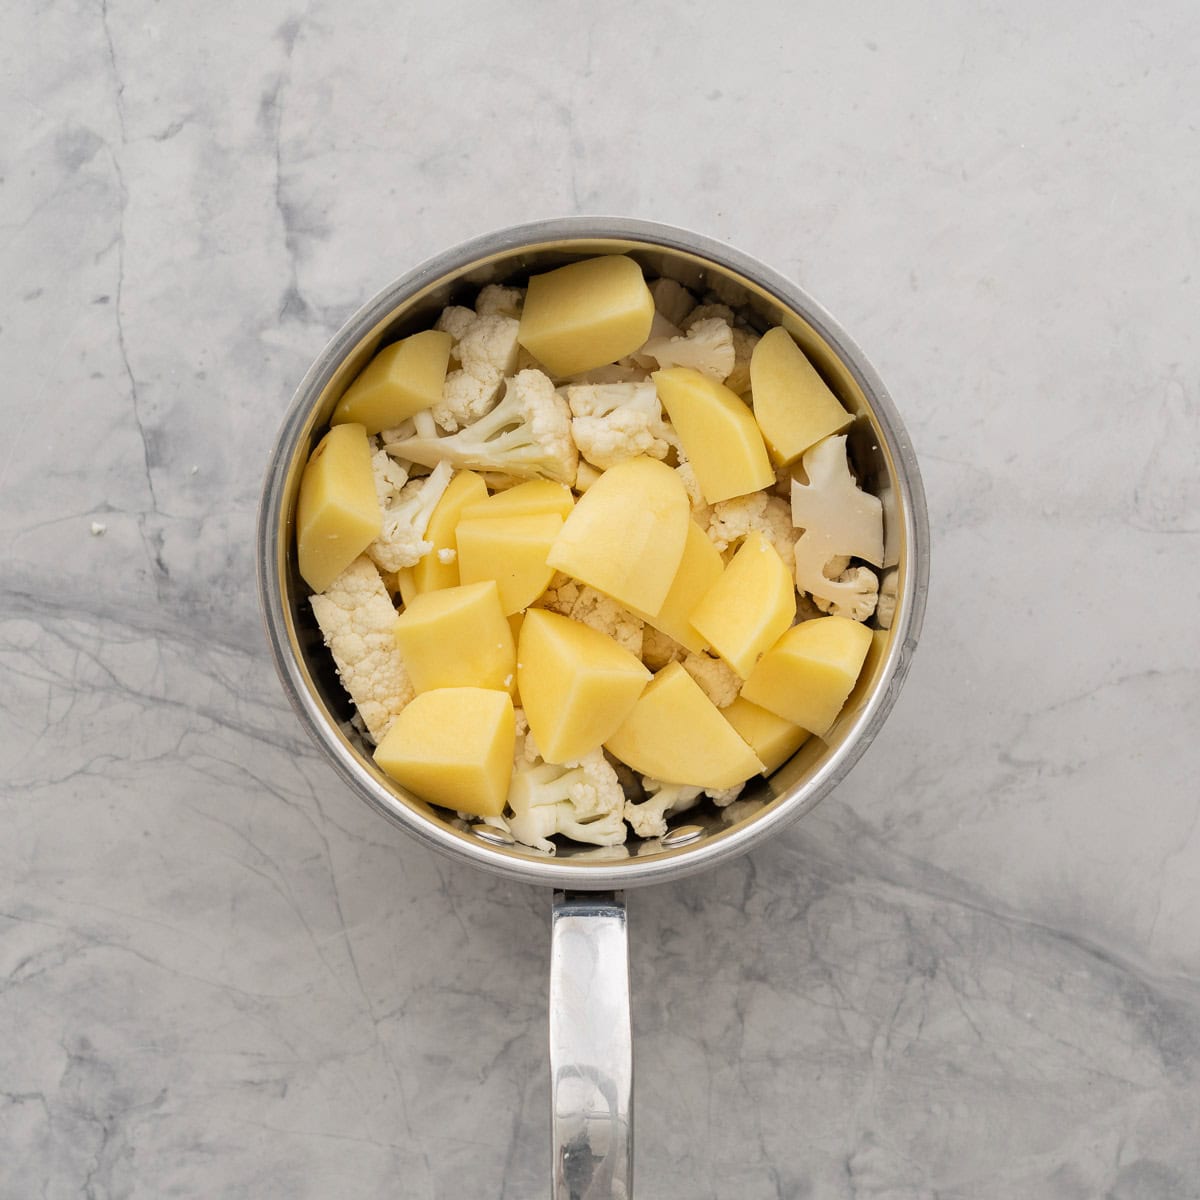 Peeled cubed potato pieces and cauliflower florets in a stainless steel saucepan. 